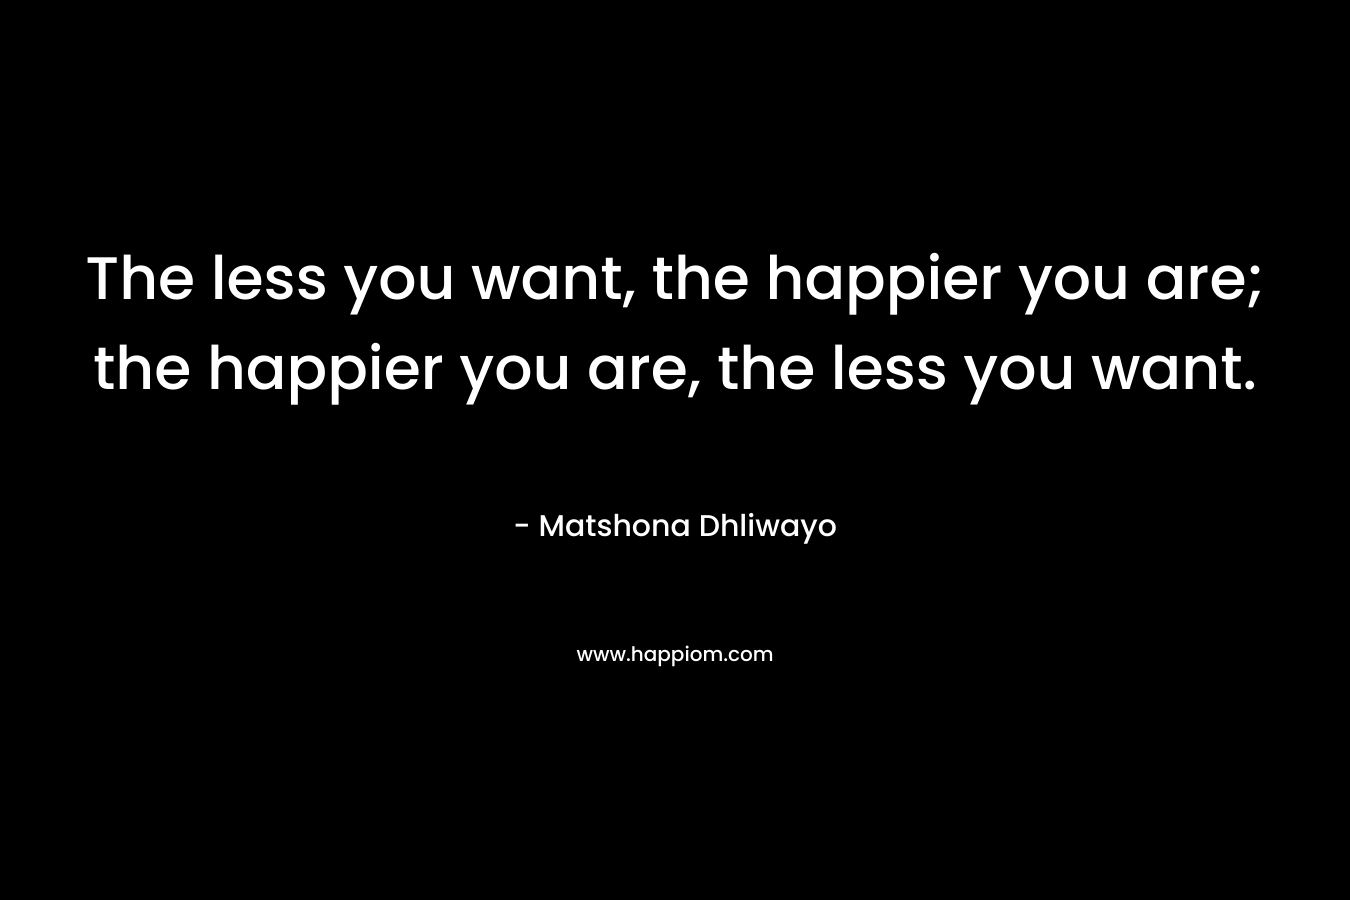 The less you want, the happier you are; the happier you are, the less you want.